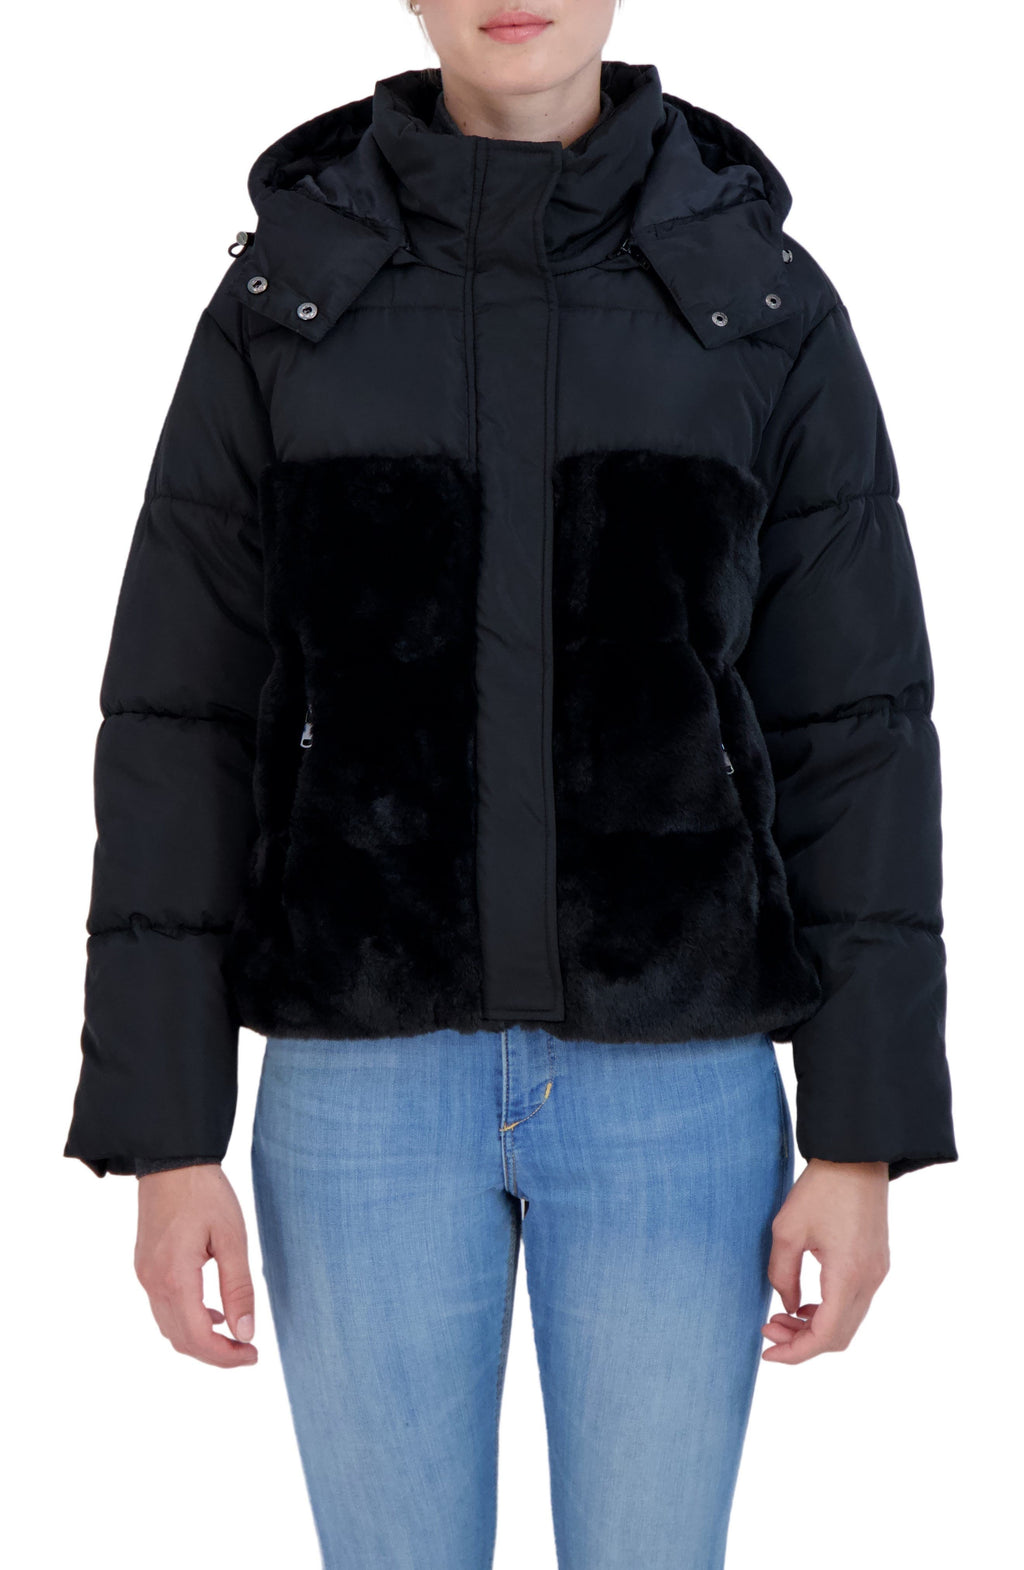 SEBBY Faux Fur Trimmed Hooded Puffer Jacket, Main, color, BLACK